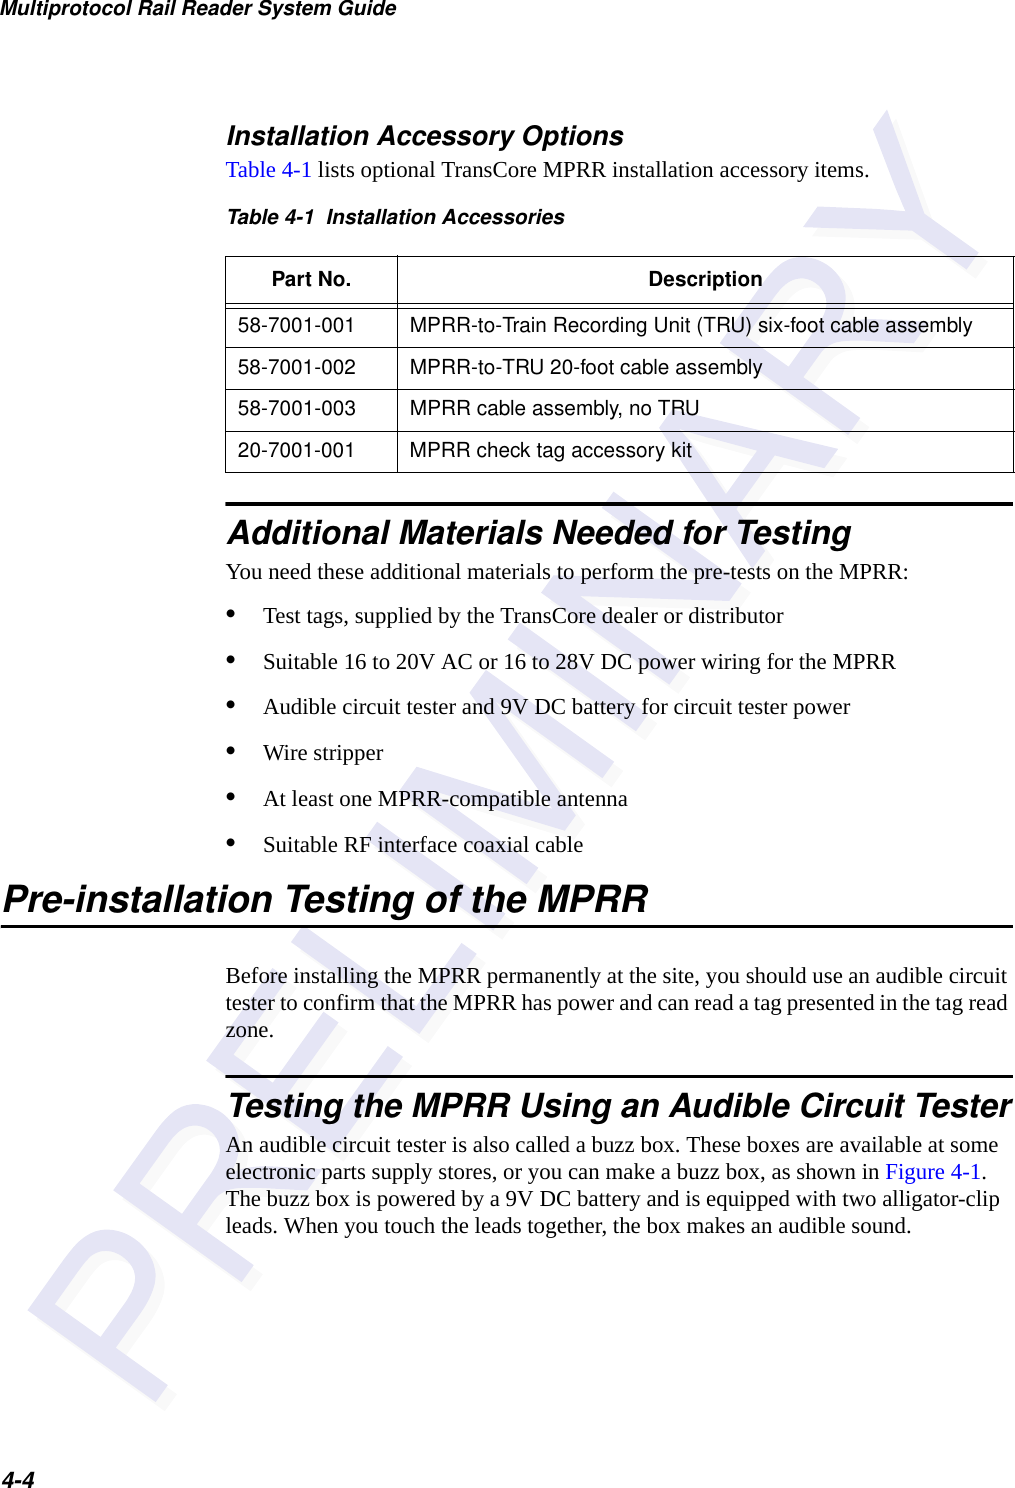 Multiprotocol Rail Reader System Guide4-4Installation Accessory OptionsTable 4-1 lists optional TransCore MPRR installation accessory items.  Additional Materials Needed for TestingYou need these additional materials to perform the pre-tests on the MPRR:•Test tags, supplied by the TransCore dealer or distributor•Suitable 16 to 20V AC or 16 to 28V DC power wiring for the MPRR •Audible circuit tester and 9V DC battery for circuit tester power •Wire stripper•At least one MPRR-compatible antenna•Suitable RF interface coaxial cablePre-installation Testing of the MPRRBefore installing the MPRR permanently at the site, you should use an audible circuit tester to confirm that the MPRR has power and can read a tag presented in the tag read zone.Testing the MPRR Using an Audible Circuit TesterAn audible circuit tester is also called a buzz box. These boxes are available at some electronic parts supply stores, or you can make a buzz box, as shown in Figure 4-1. The buzz box is powered by a 9V DC battery and is equipped with two alligator-clip leads. When you touch the leads together, the box makes an audible sound.Table 4-1  Installation AccessoriesPart No. Description58-7001-001 MPRR-to-Train Recording Unit (TRU) six-foot cable assembly58-7001-002 MPRR-to-TRU 20-foot cable assembly58-7001-003 MPRR cable assembly, no TRU20-7001-001 MPRR check tag accessory kit